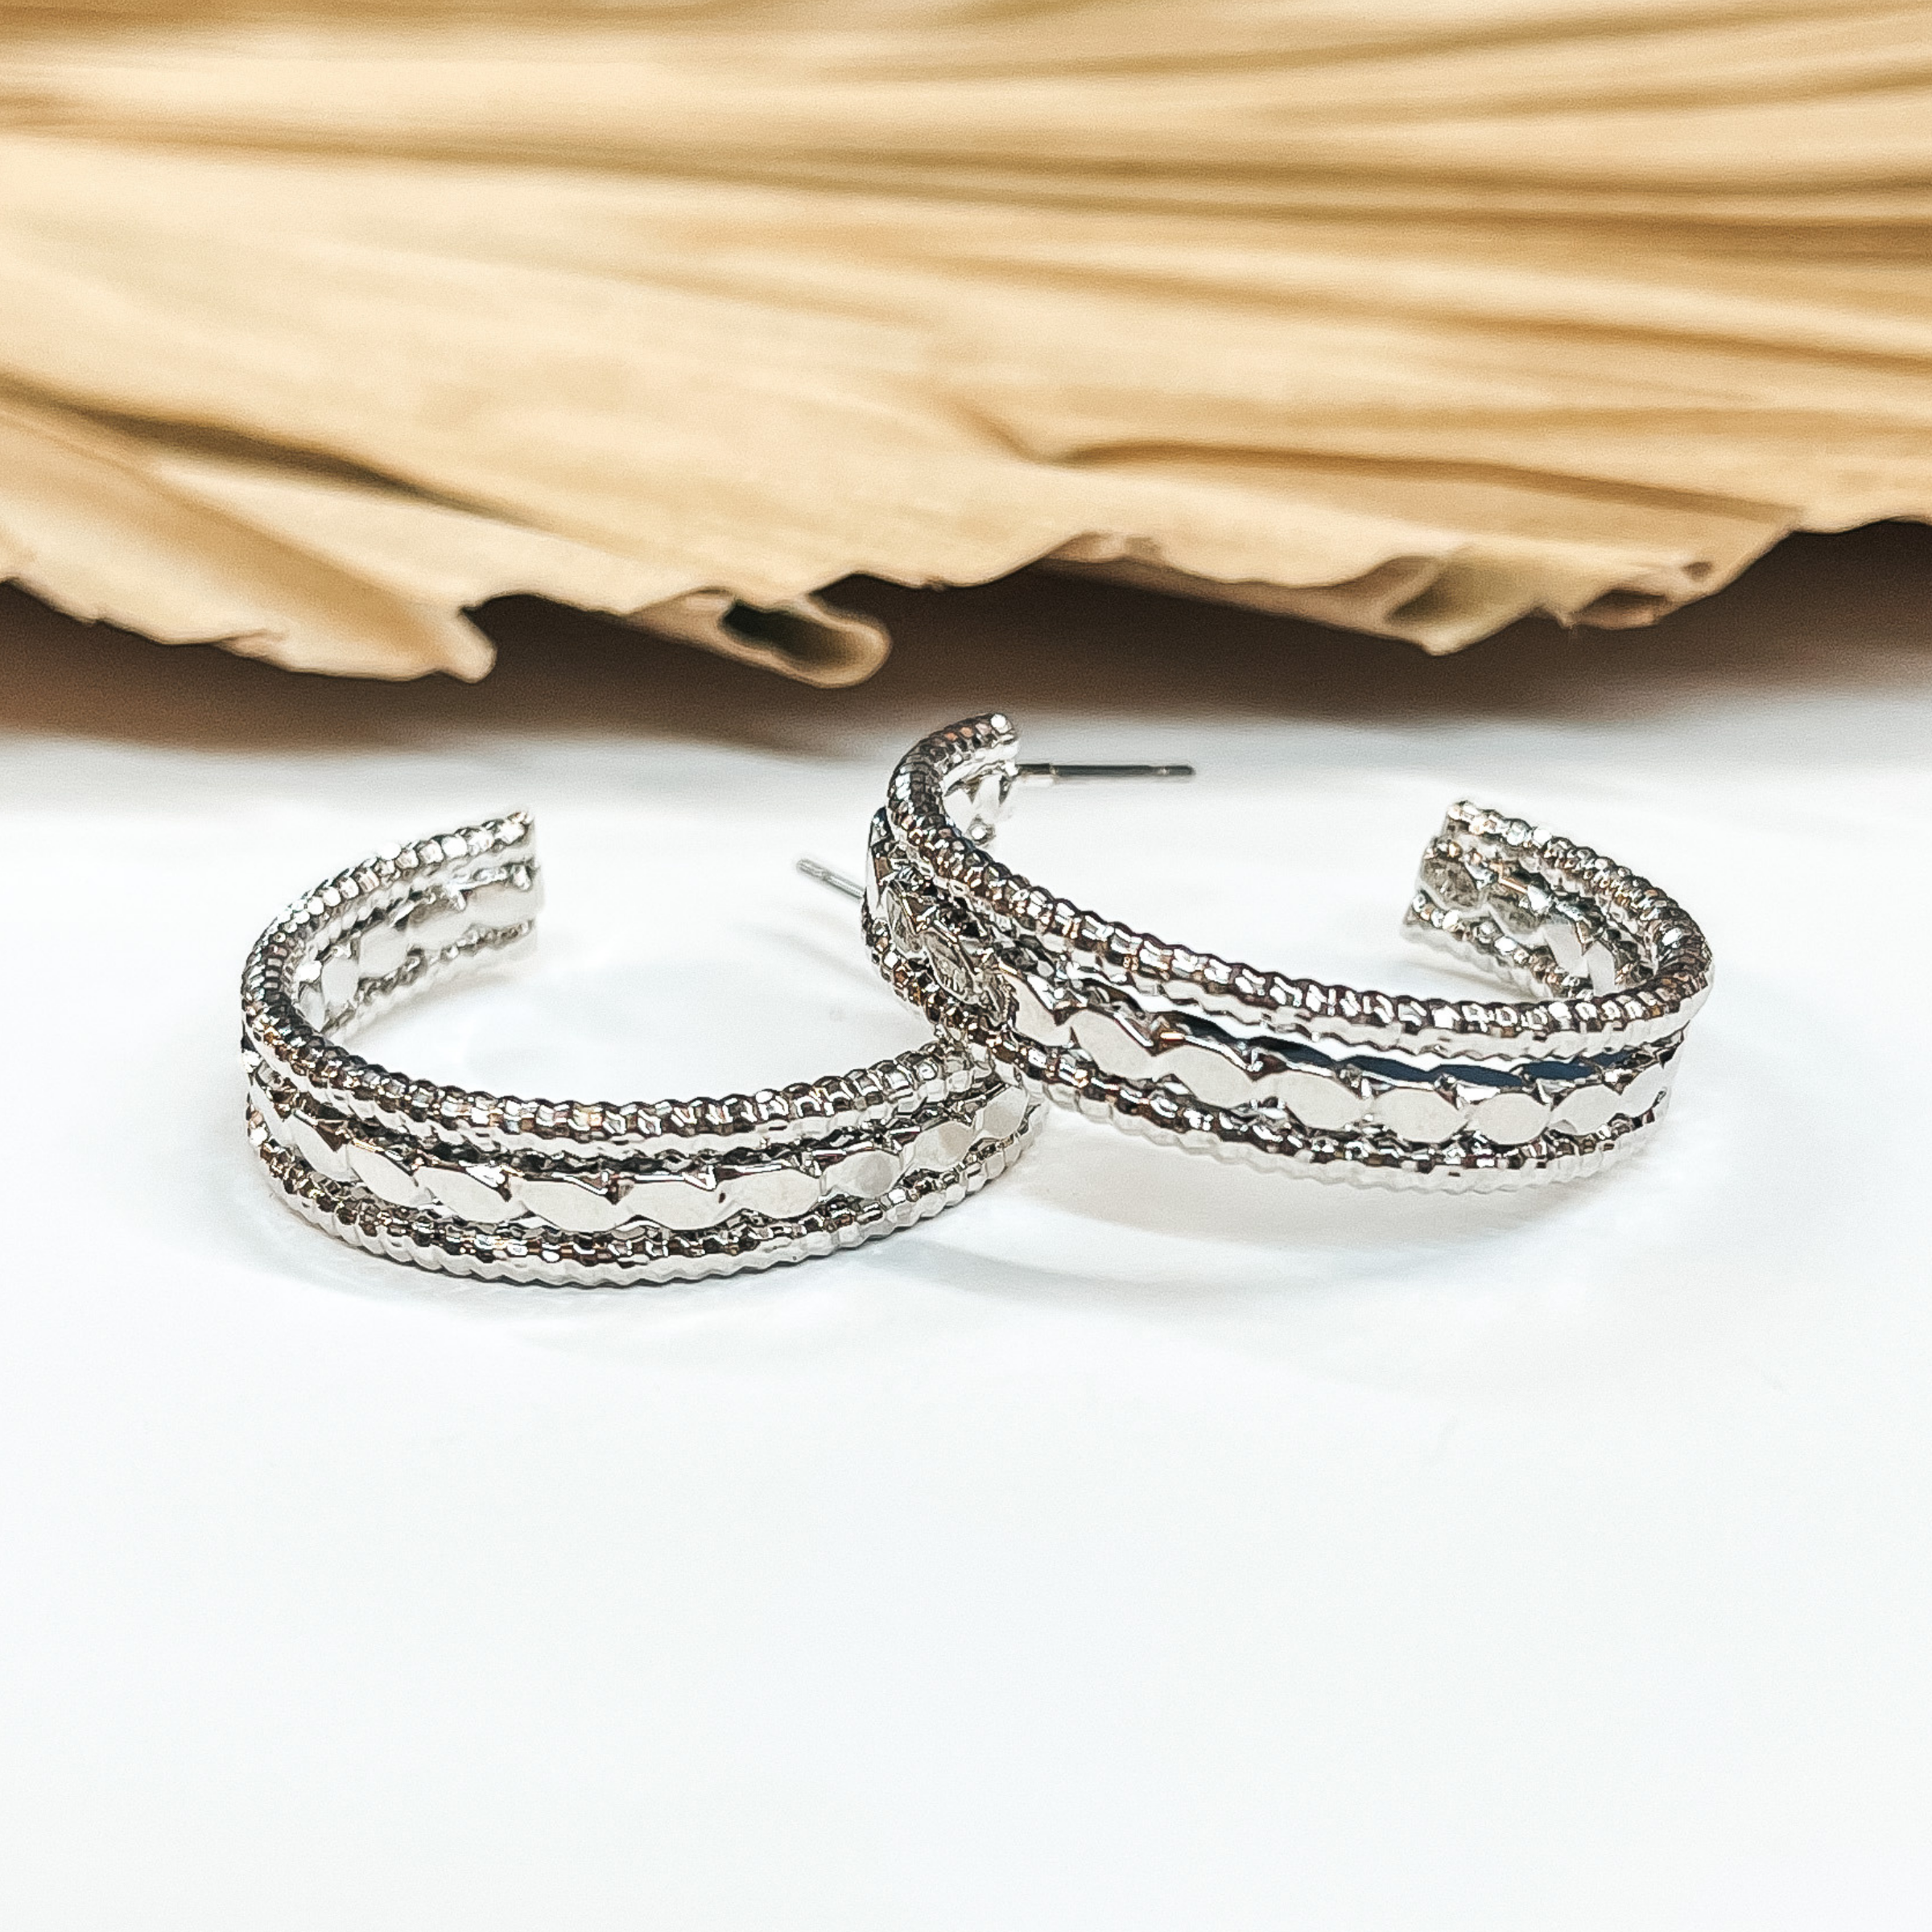 Open ended hoop earrings in silver with  different rope textures. These earrings are  pictured on a white background with a brown, dried up palm leaf in the back as decor.